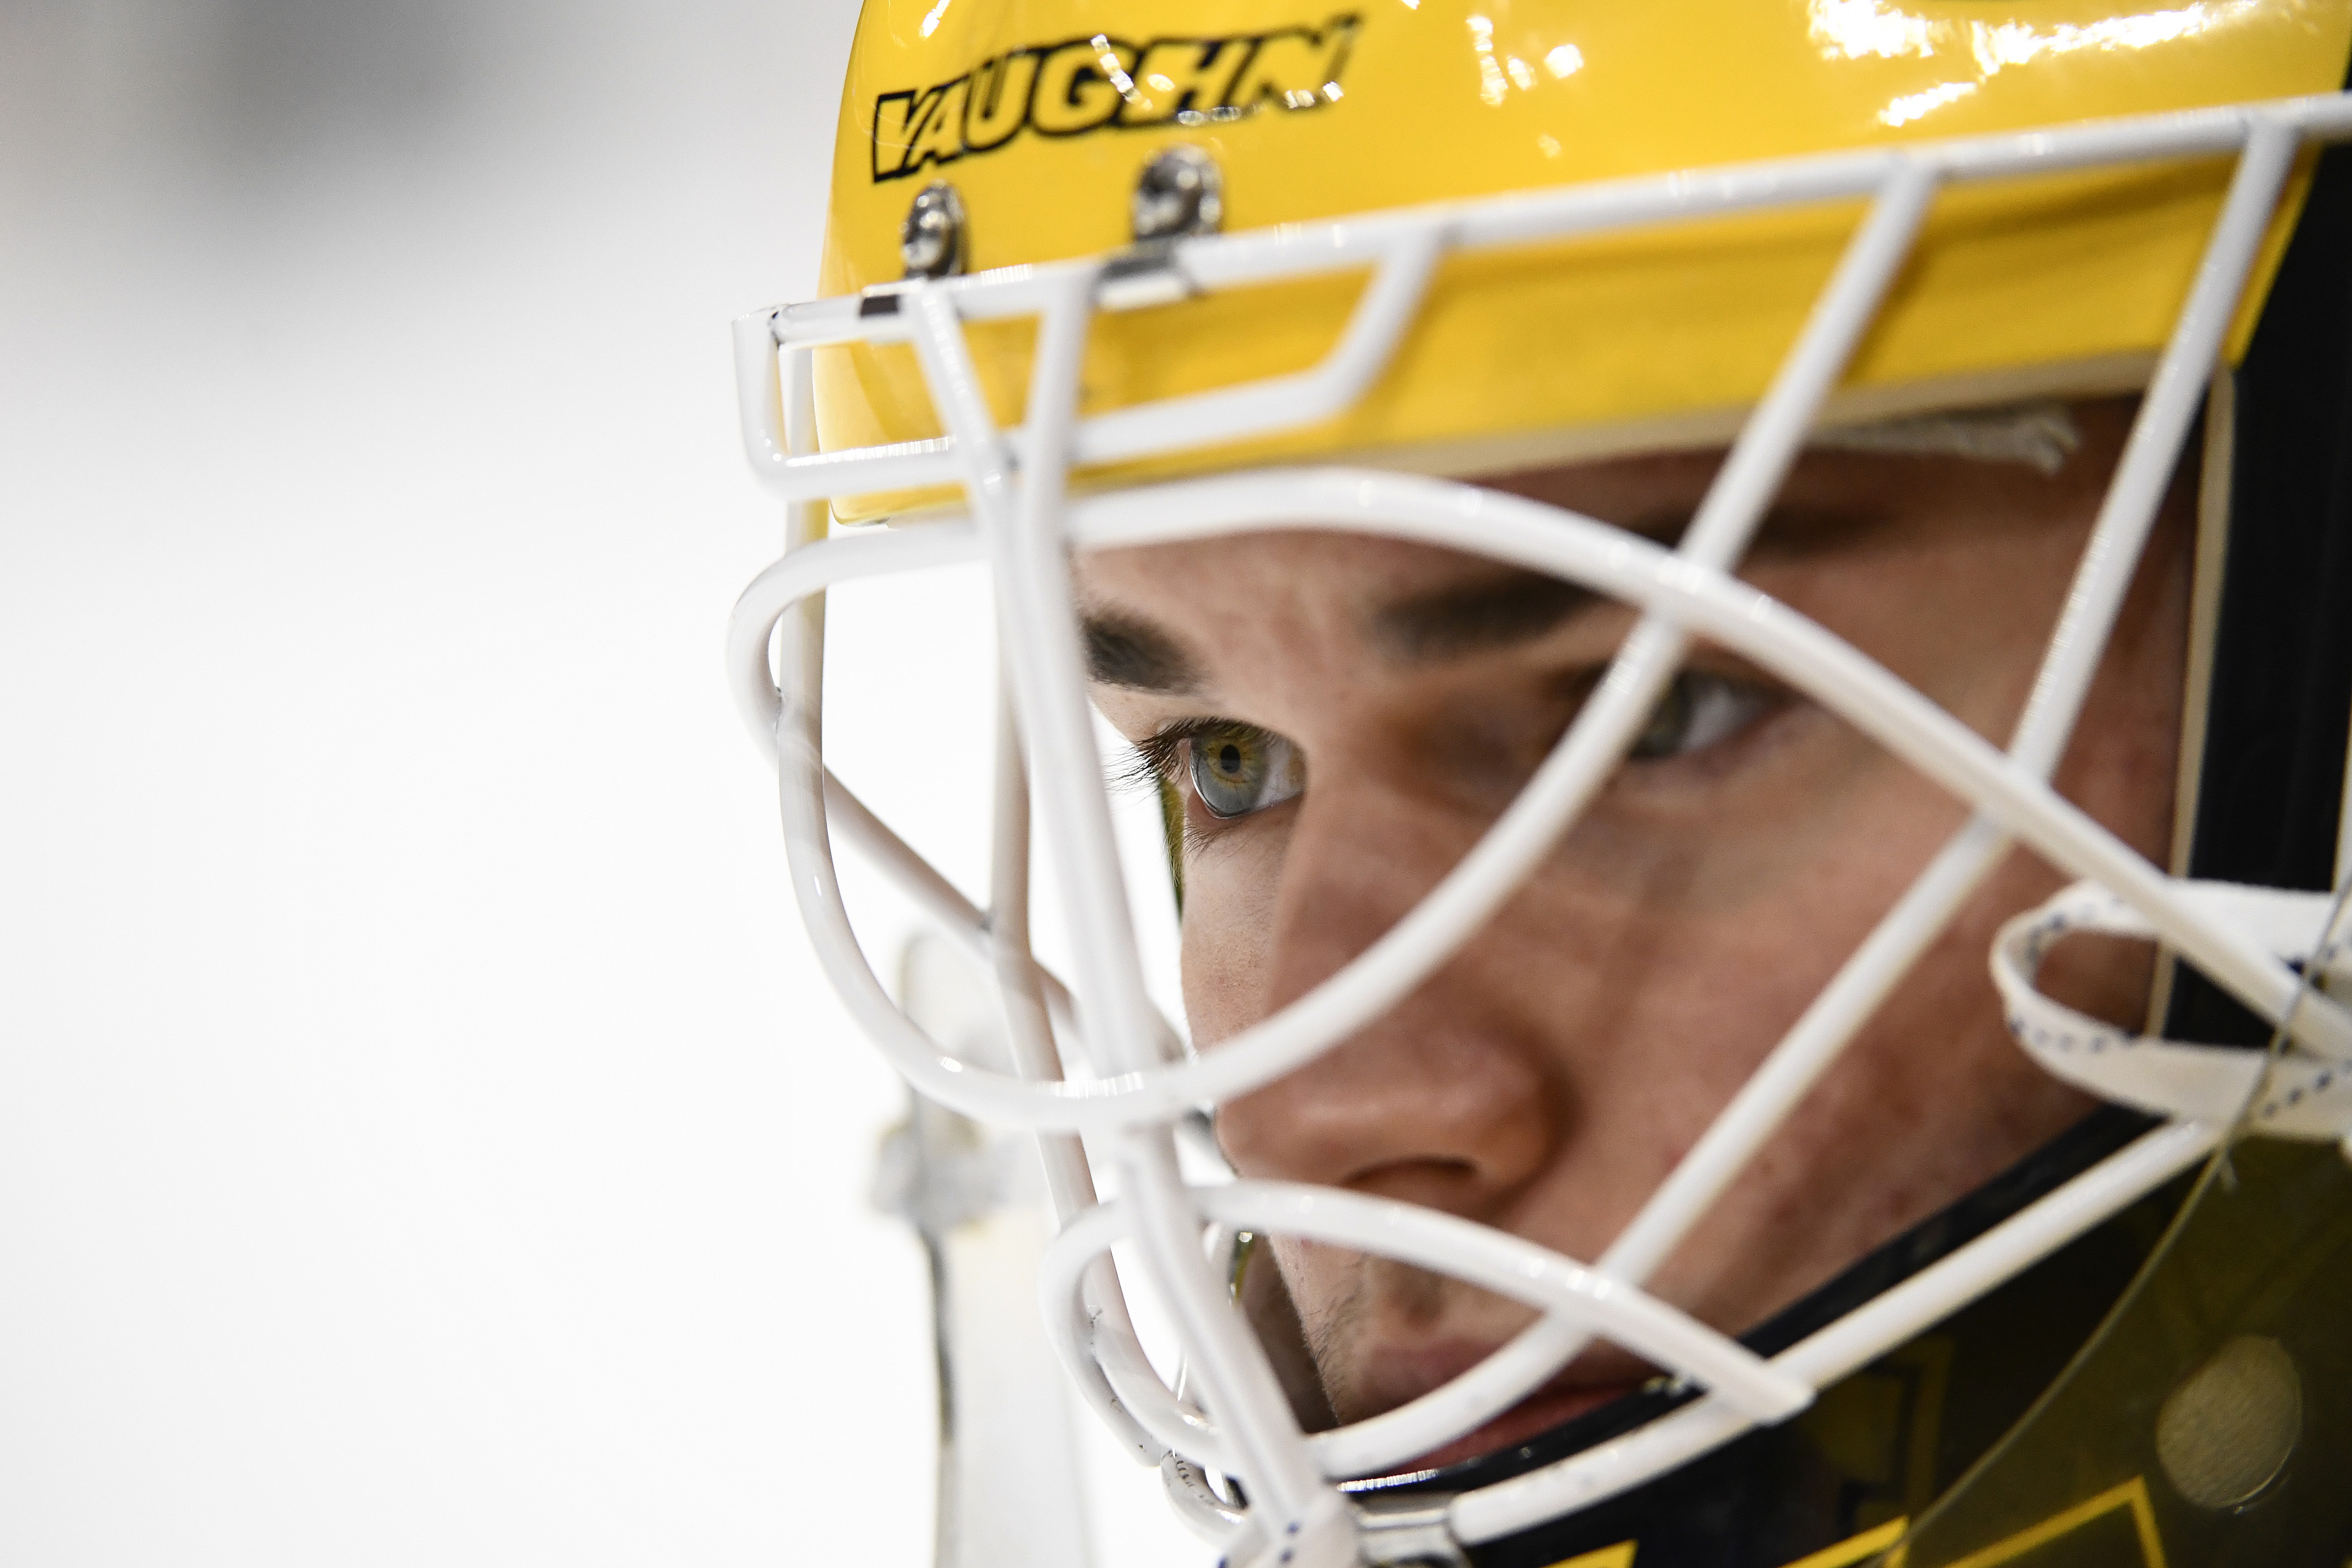 Jack LaFontaine #45 of the Michigan Wolverines concentrates on the ice against the Notre Dame Fighting Irish during the Division I Men’s Ice Hockey Semifinals held at the Xcel Energy Center on April 5, 2018 in St Paul, Minnesota.